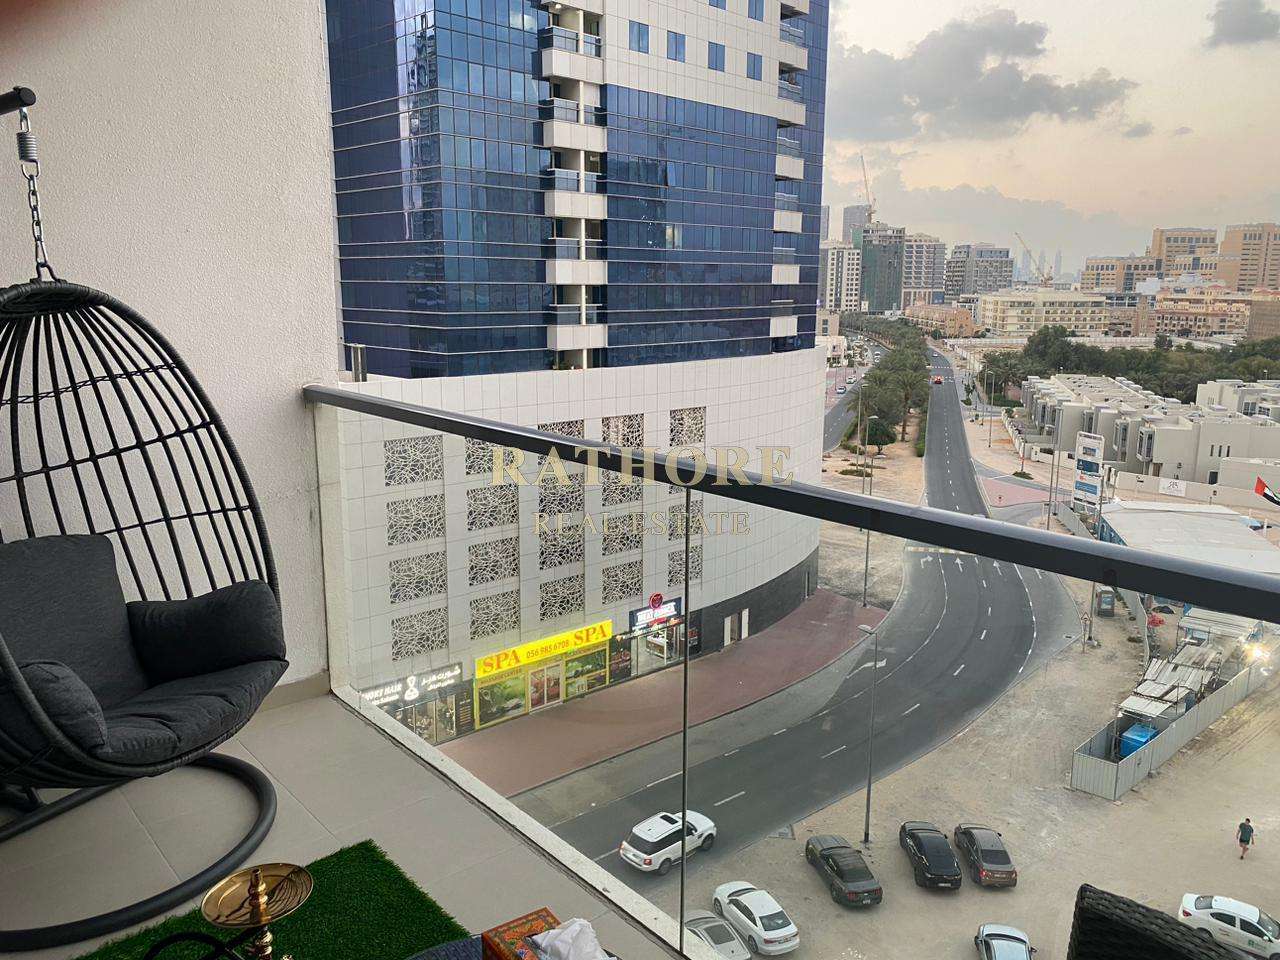 1 BR  Apartment For Rent in Jumeirah Village Circle (JVC)